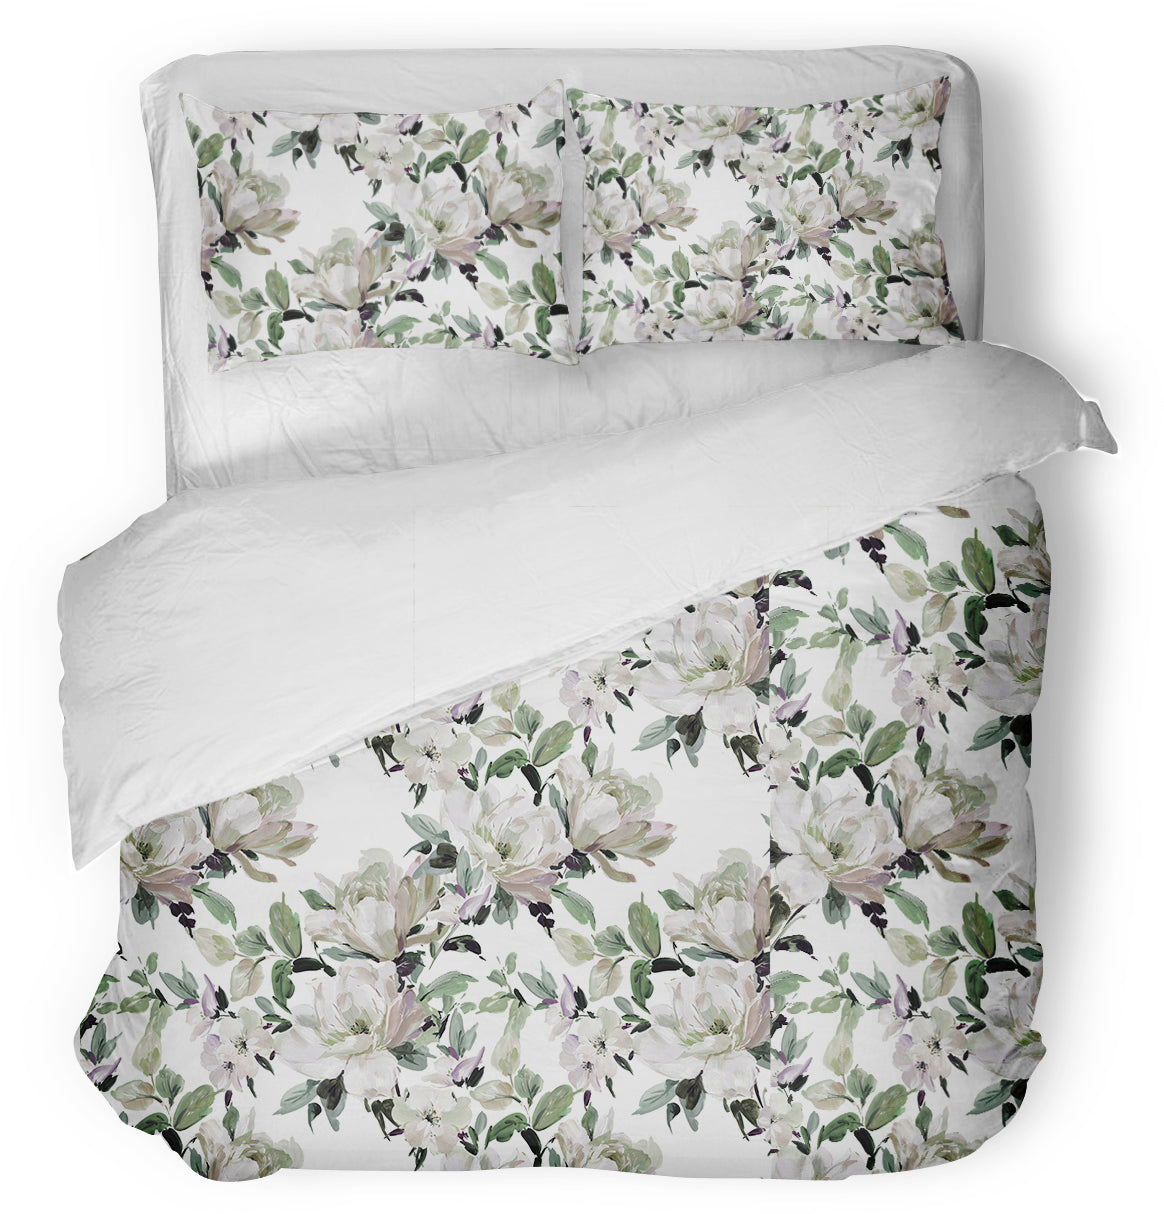 Duvet Cover Set - Green & Lilac Painted Flowers